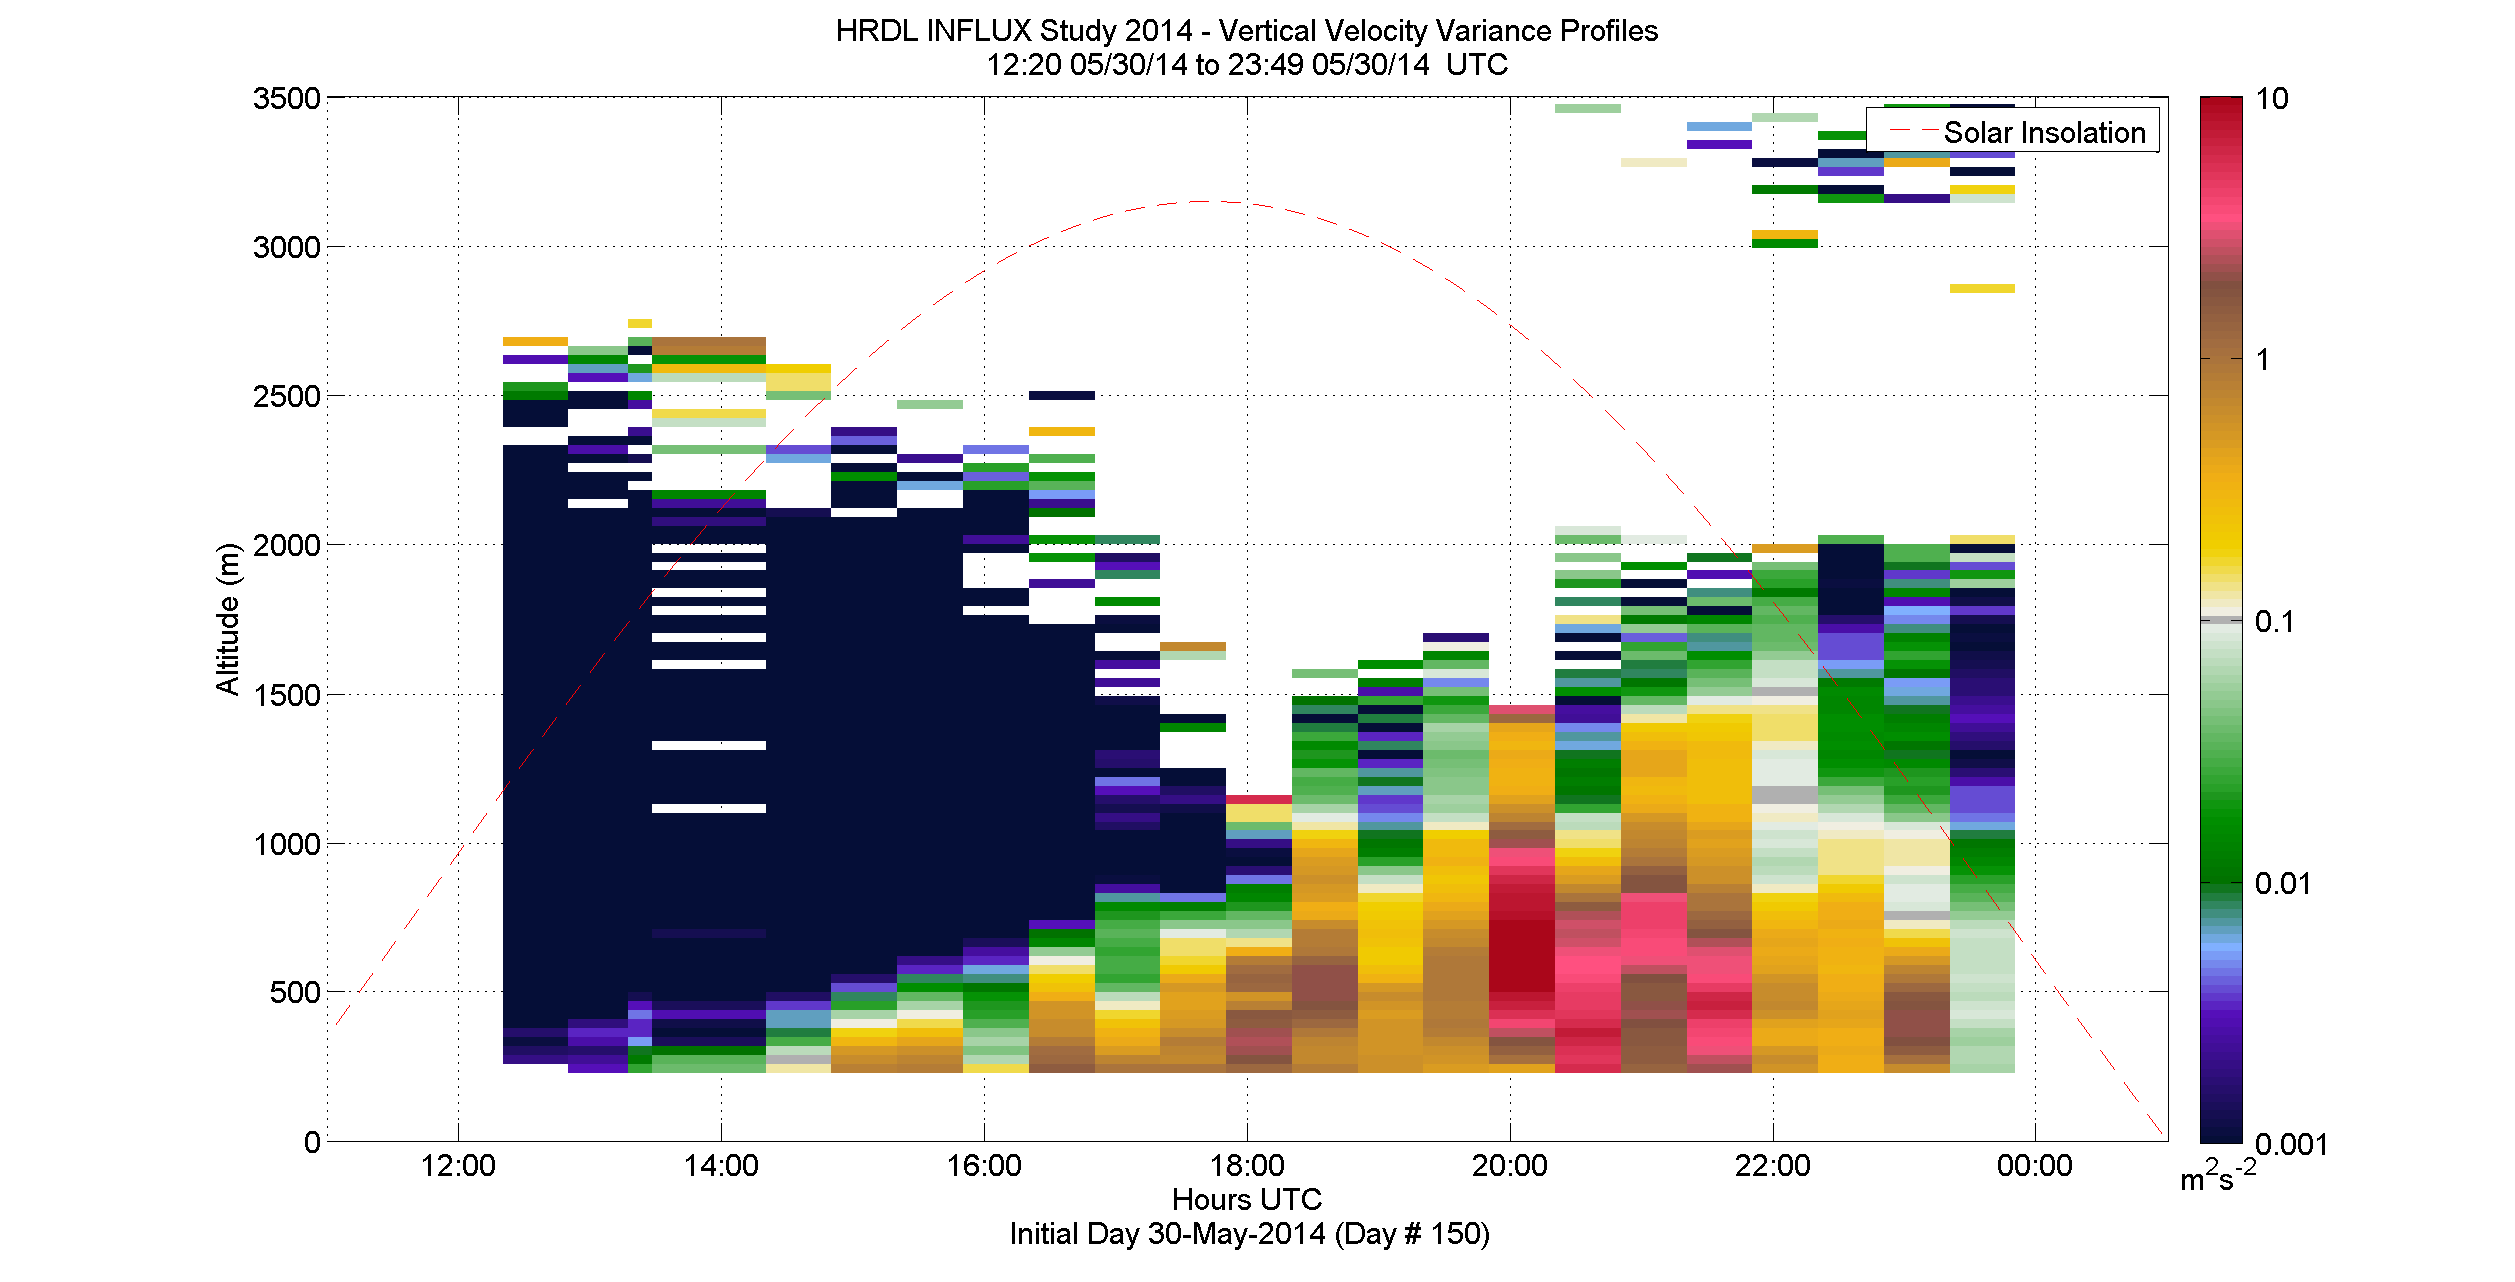 HRDL vertical velocity variance profile - May 30 pm